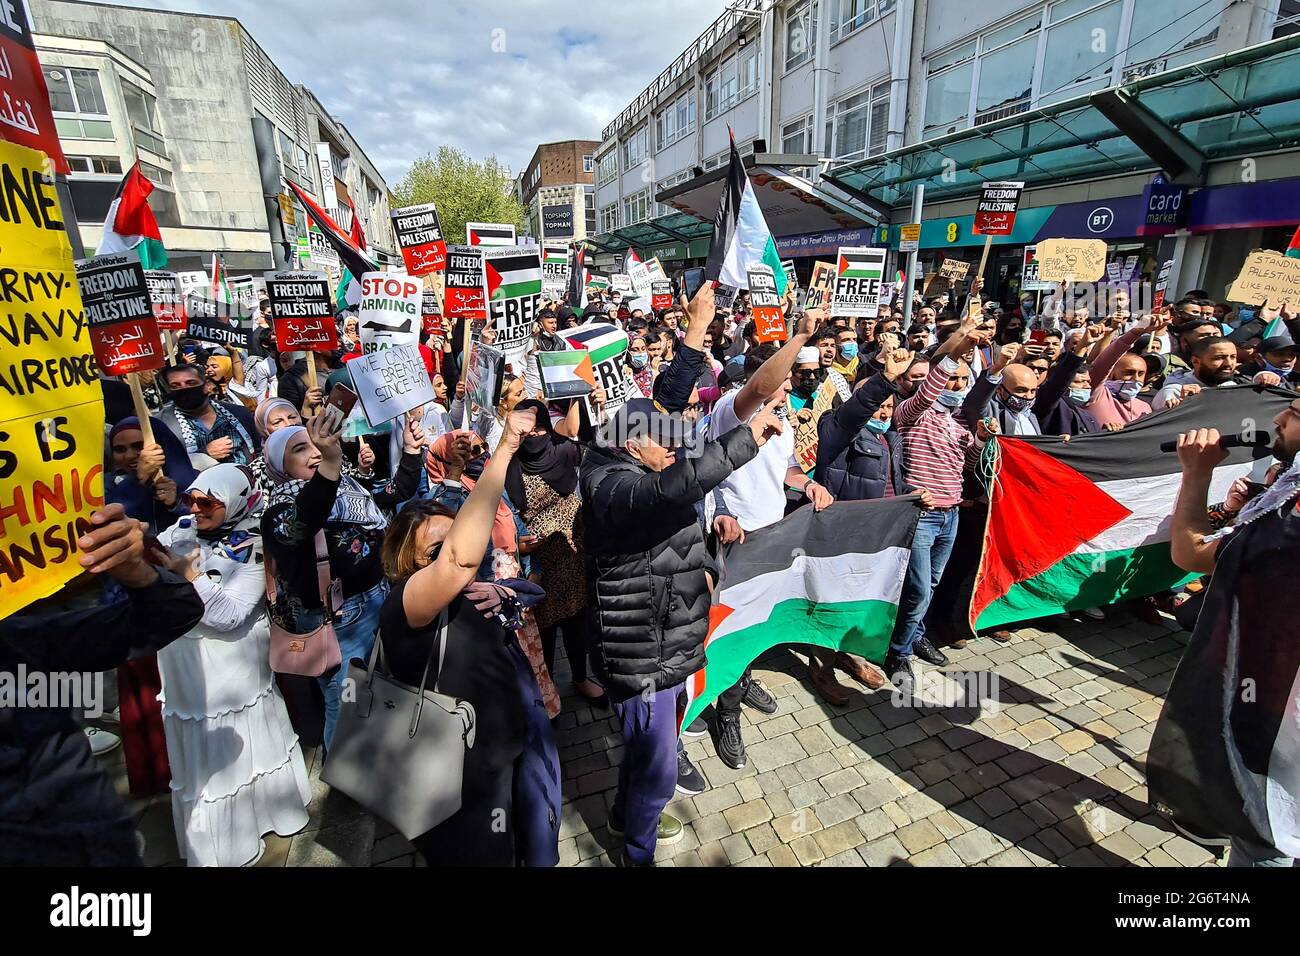 Pictured: Palestinian and local people hold a rally in Swansea, Wales, UK. Sunday 16 May 2021 Re: Palestinian people, joined by local supporters have Stock Photo